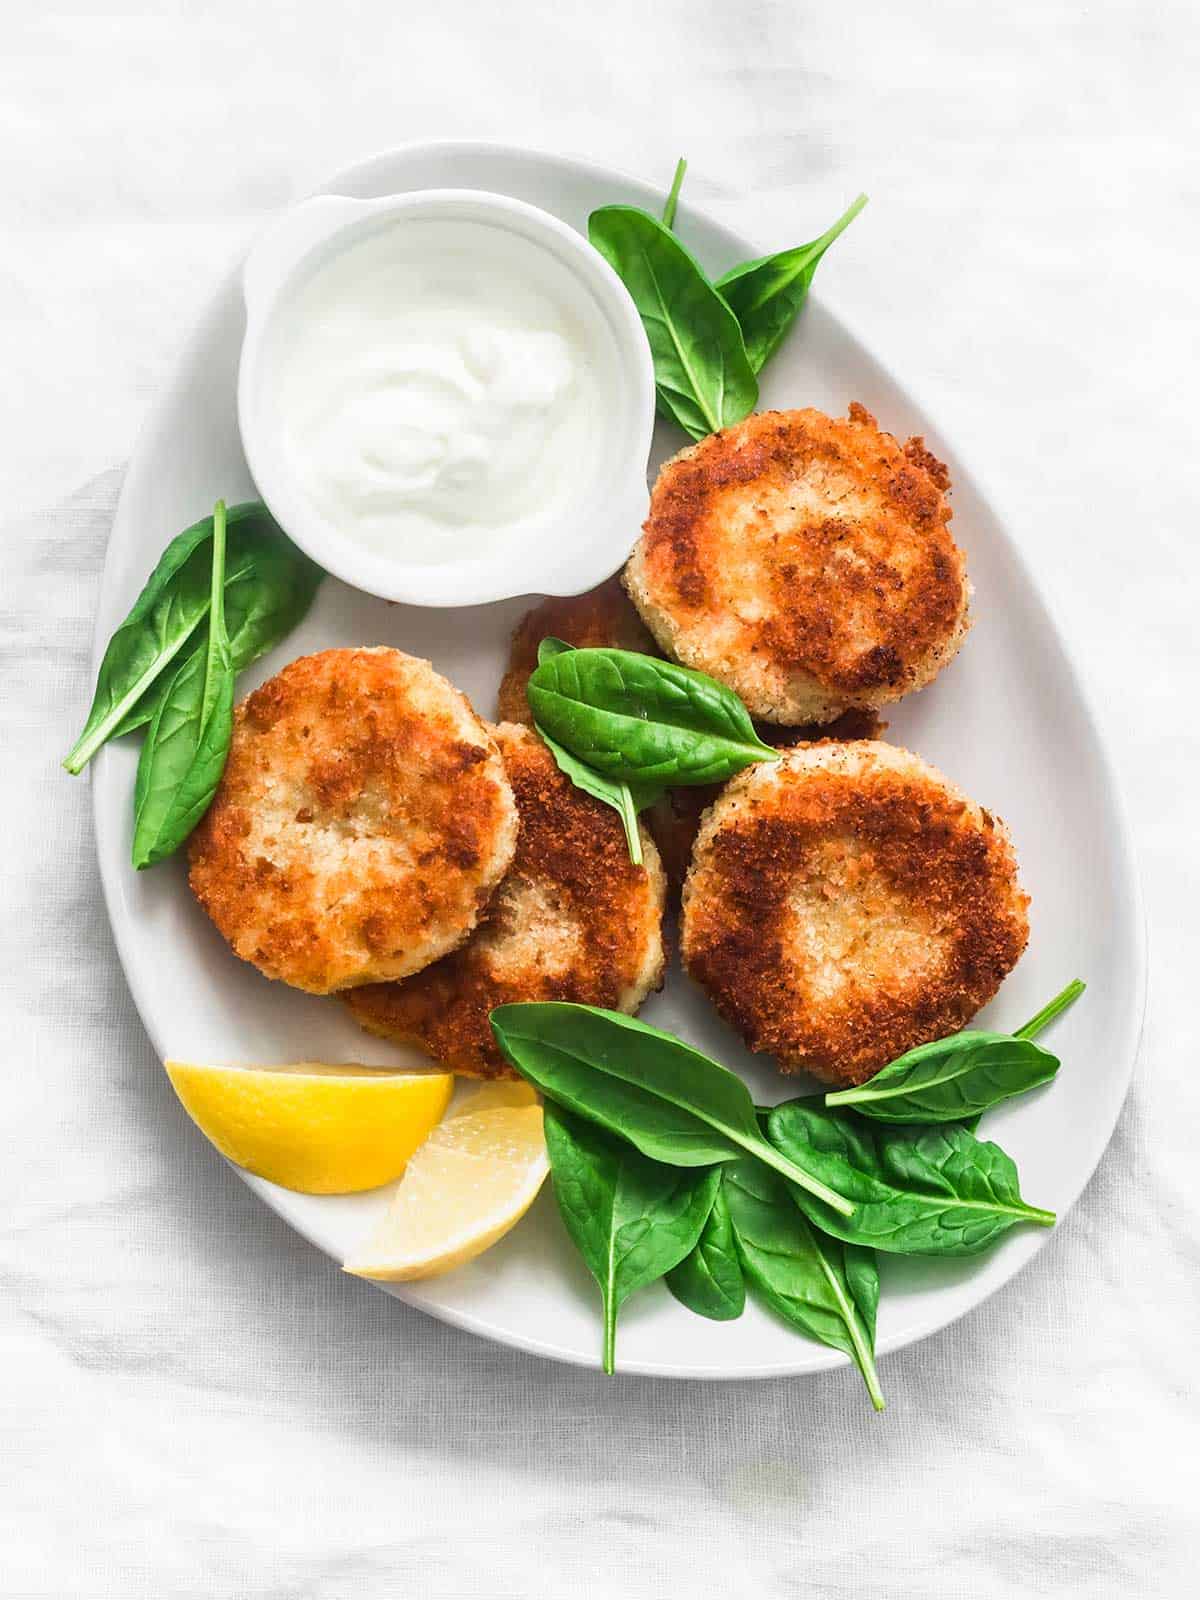 Salmon patties on a white plate with baby spinach, lemon wedges and white sauce in a bowl.